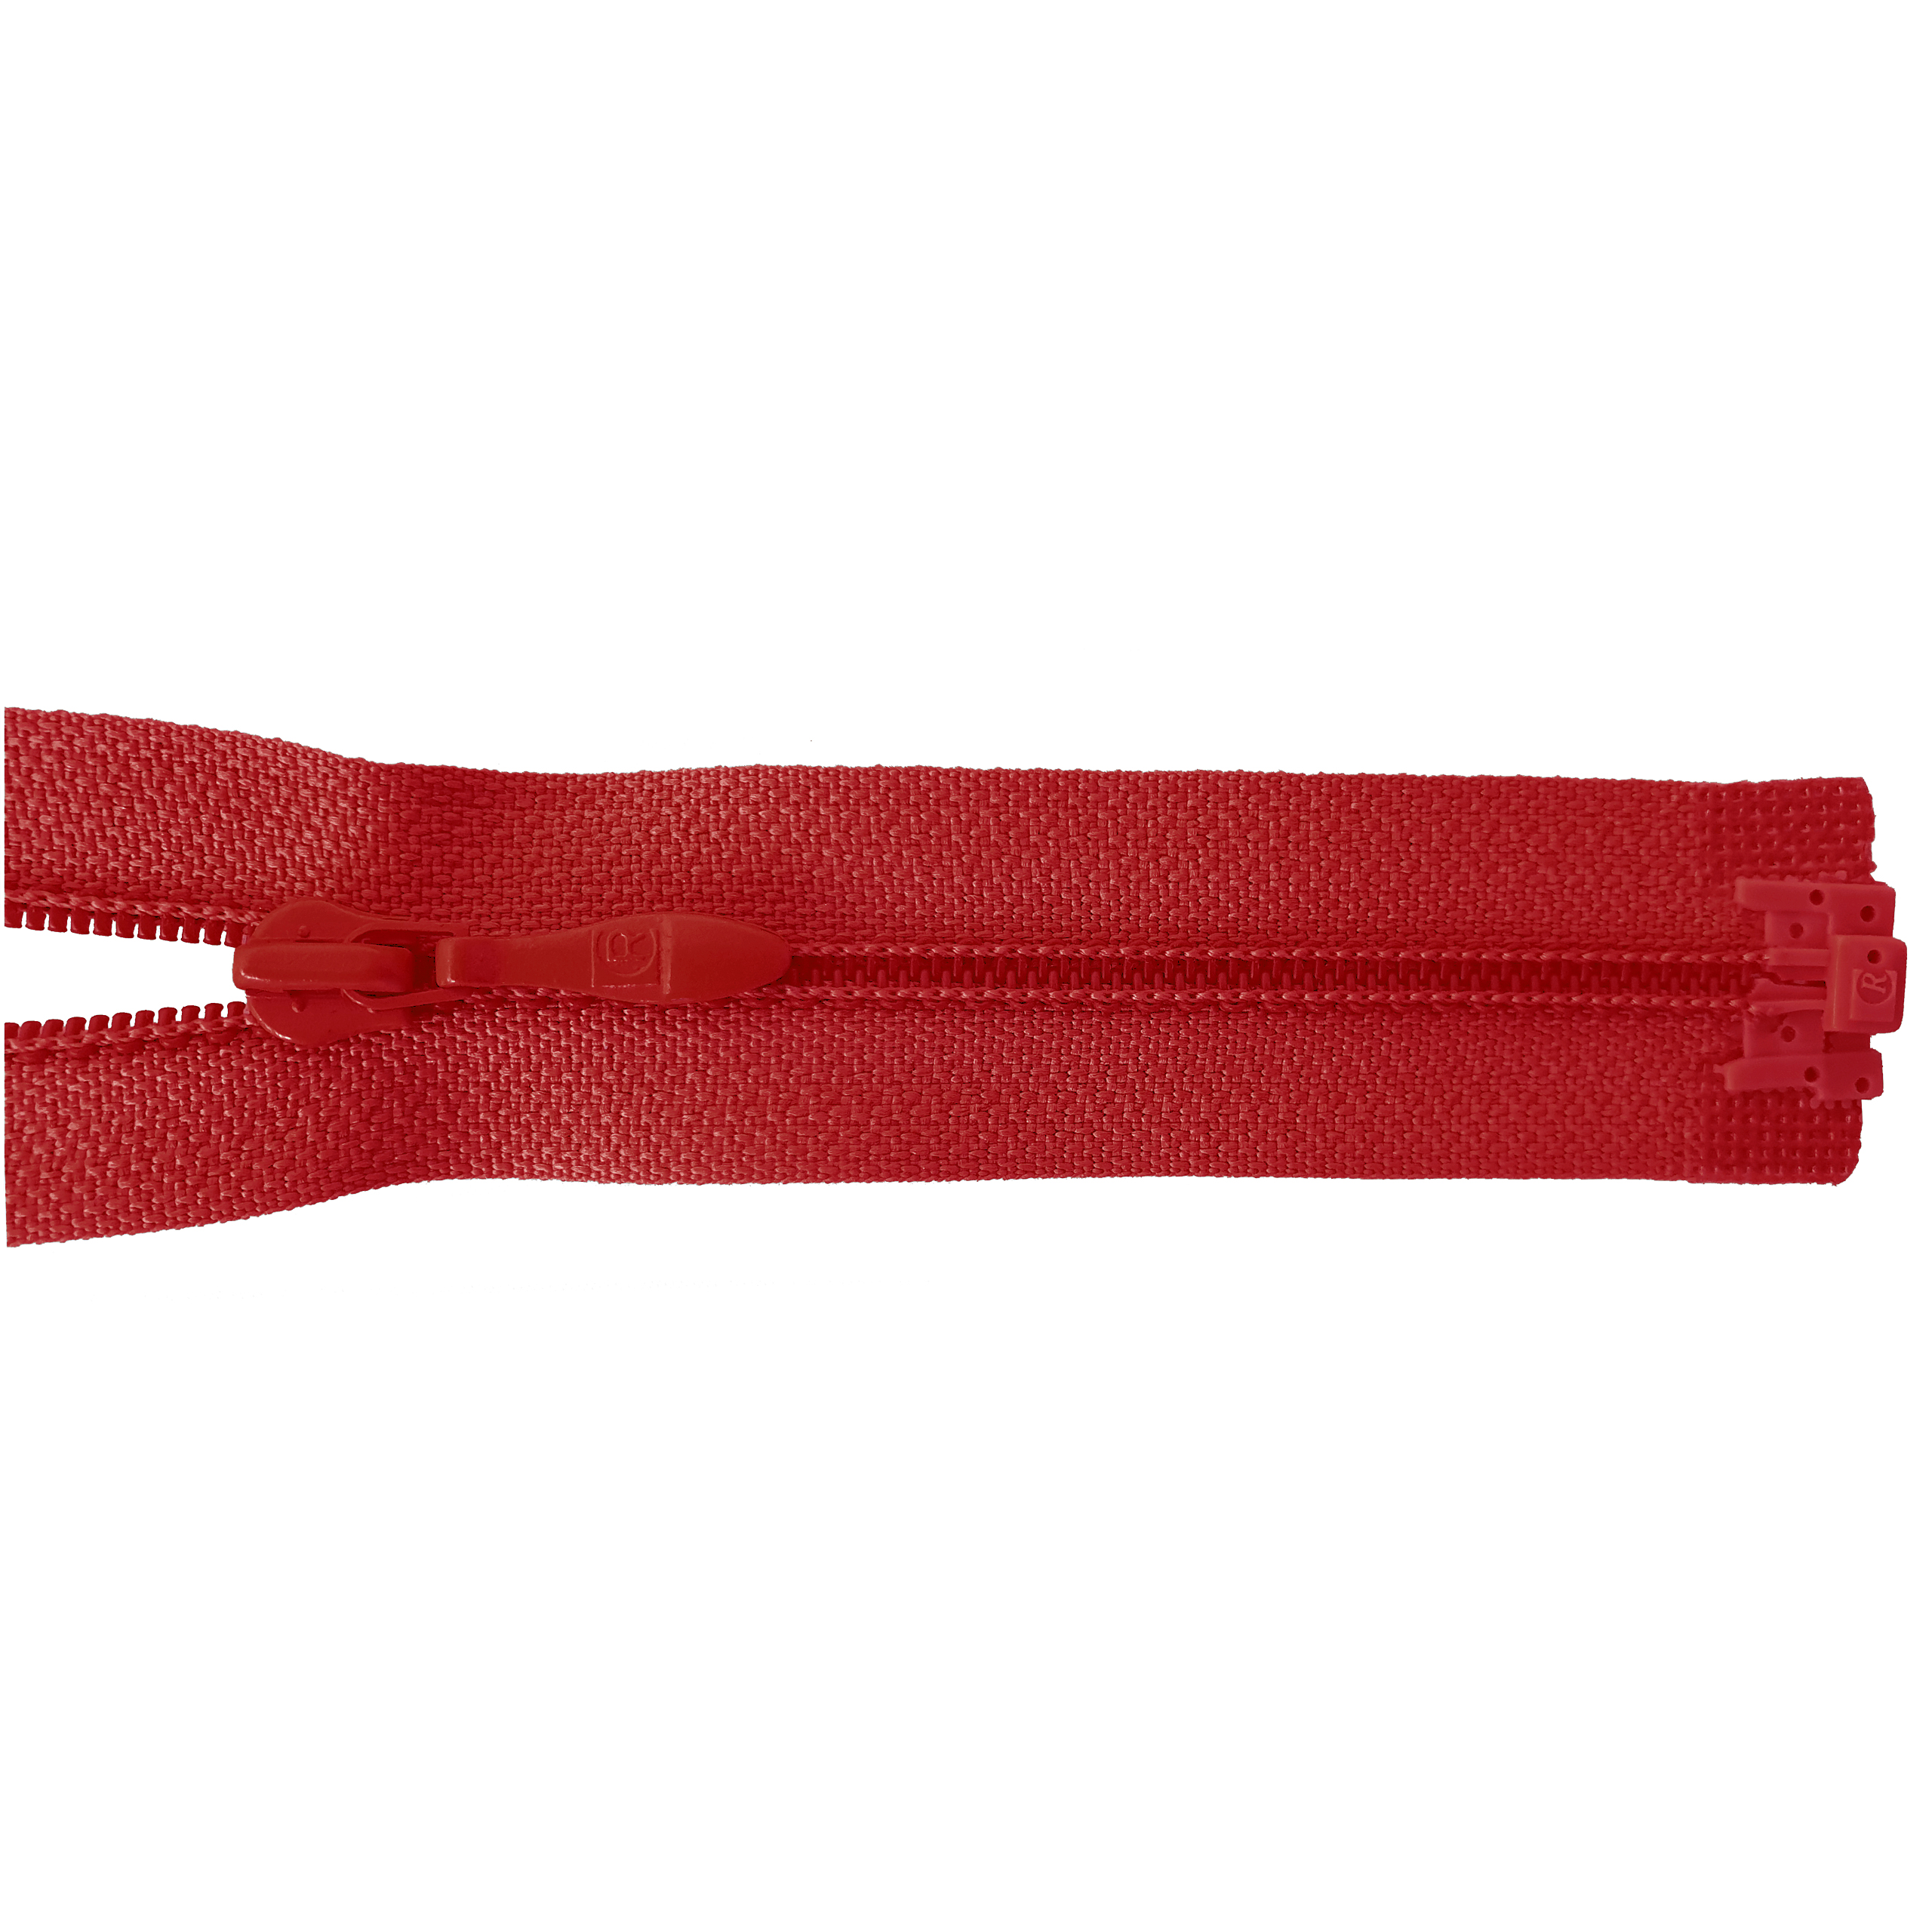 zipper 60cm,divisible, PES spiral, fein, chili/red